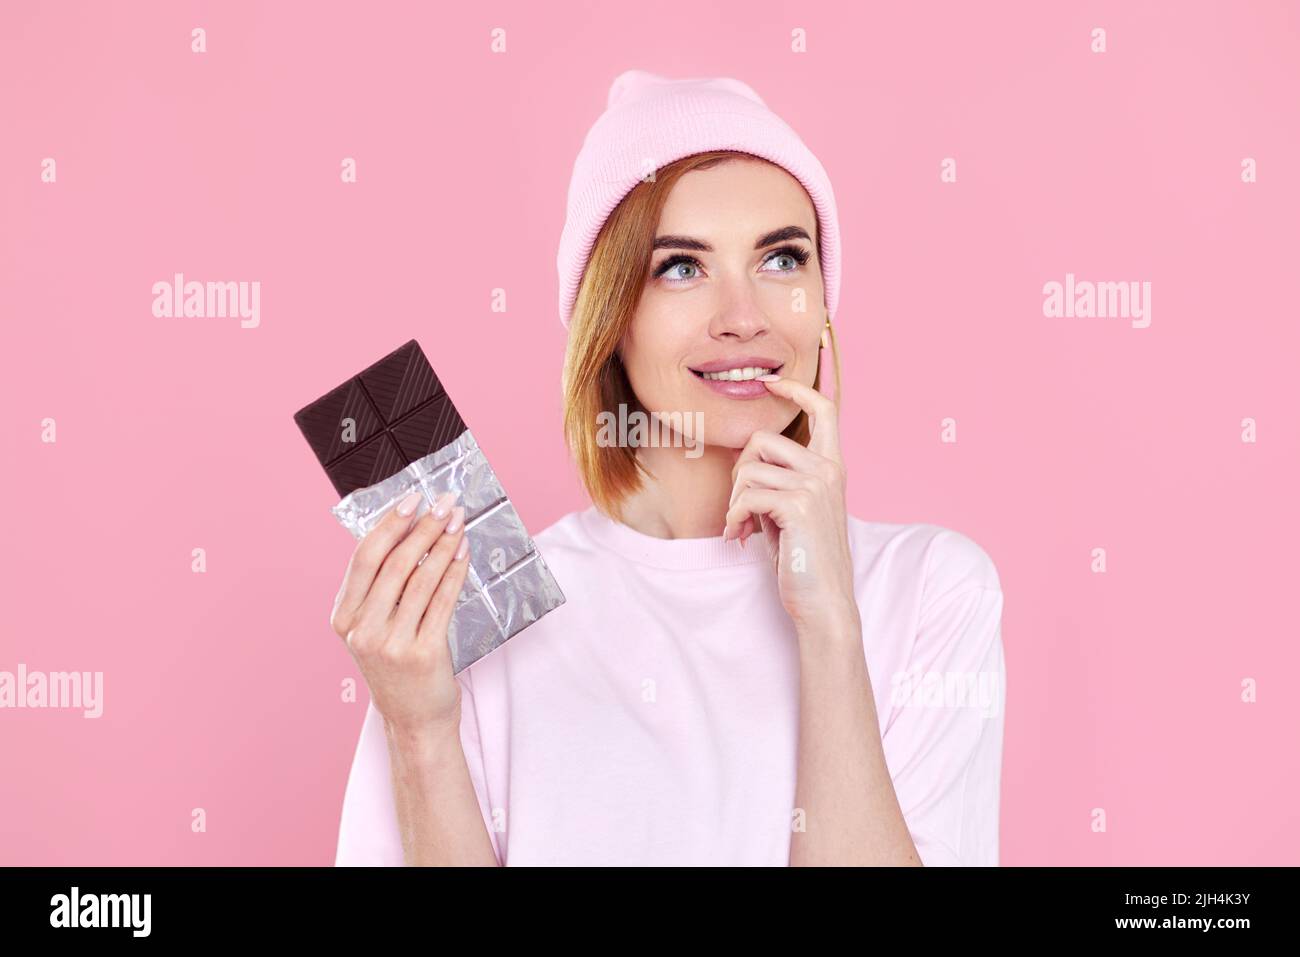 blonde woman in t-shirt and hat holding chocolate bar Stock Photo